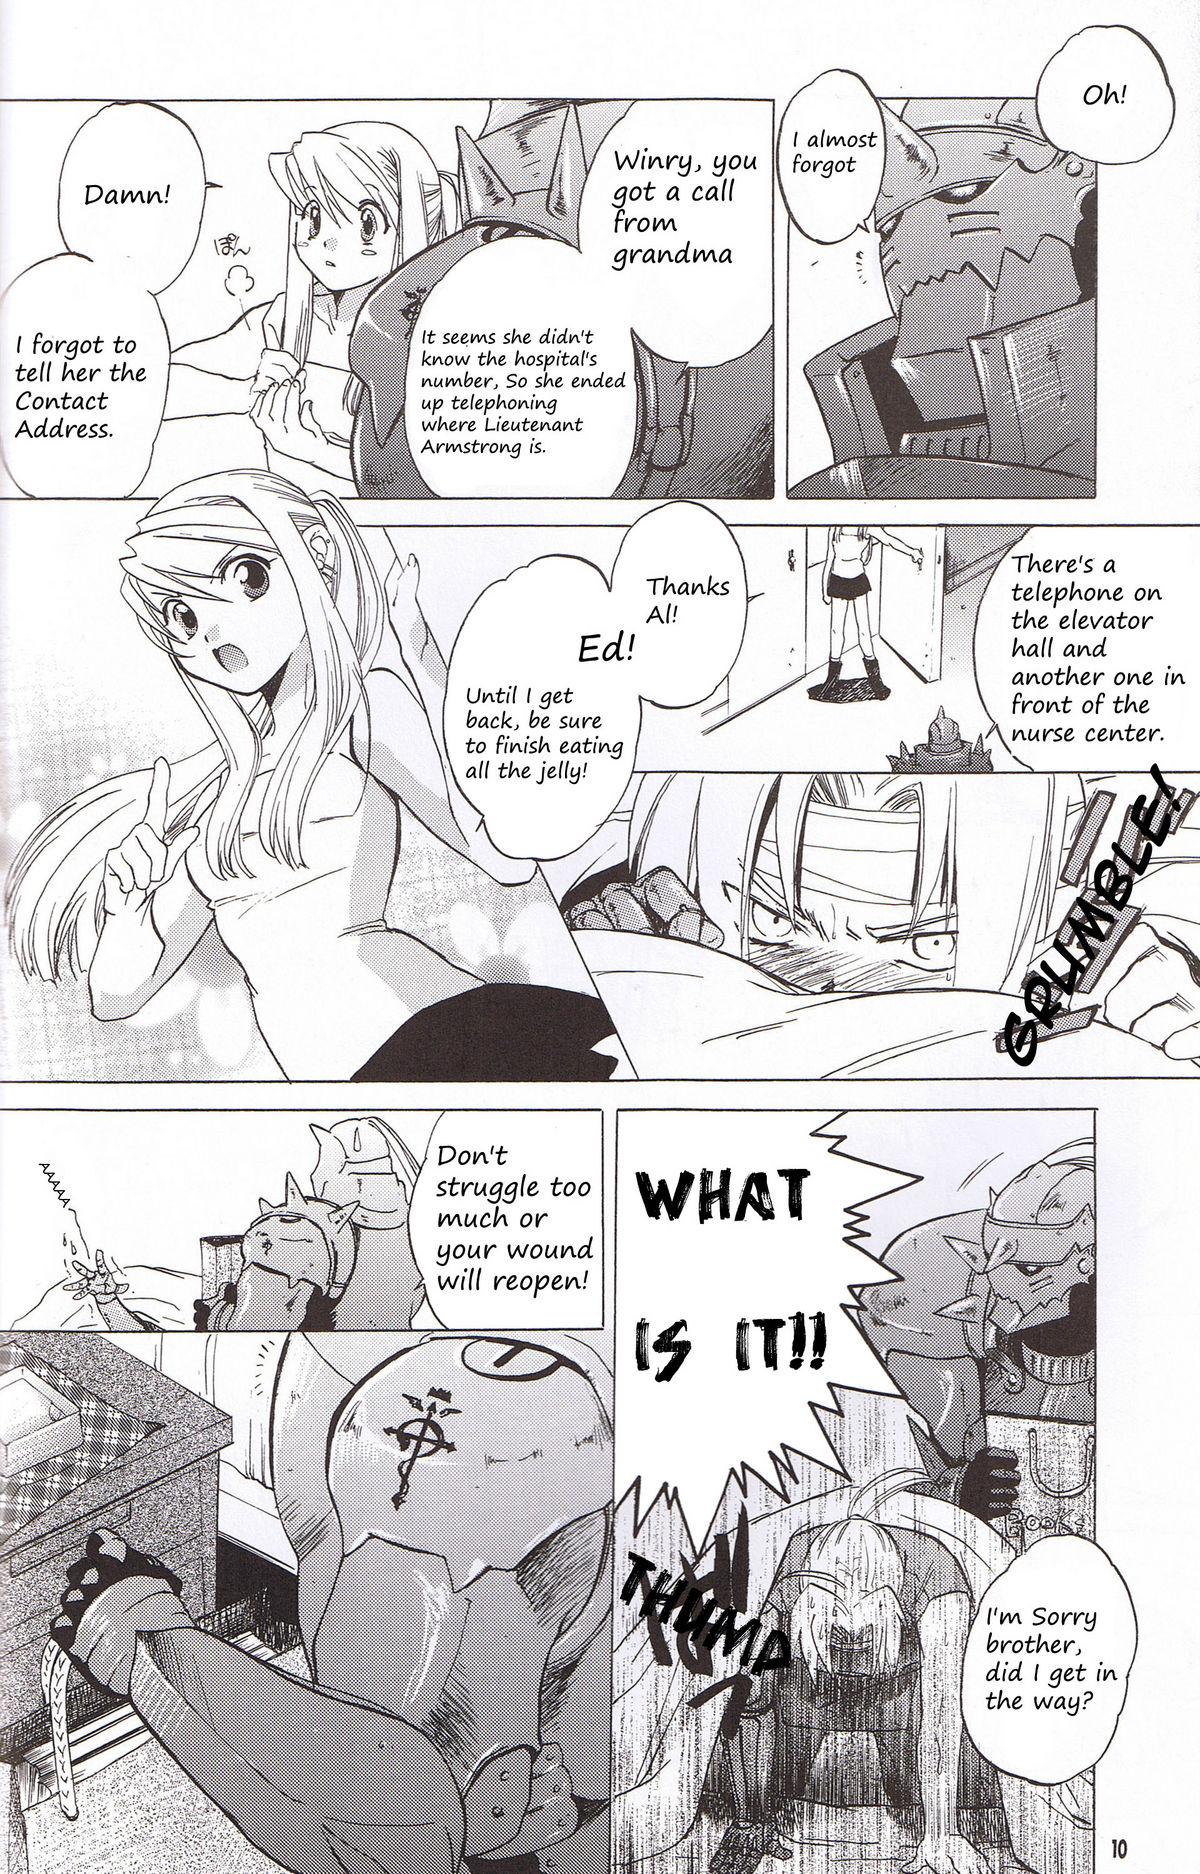 Real Amature Porn EDxWIN - Fullmetal alchemist Guyonshemale - Page 9